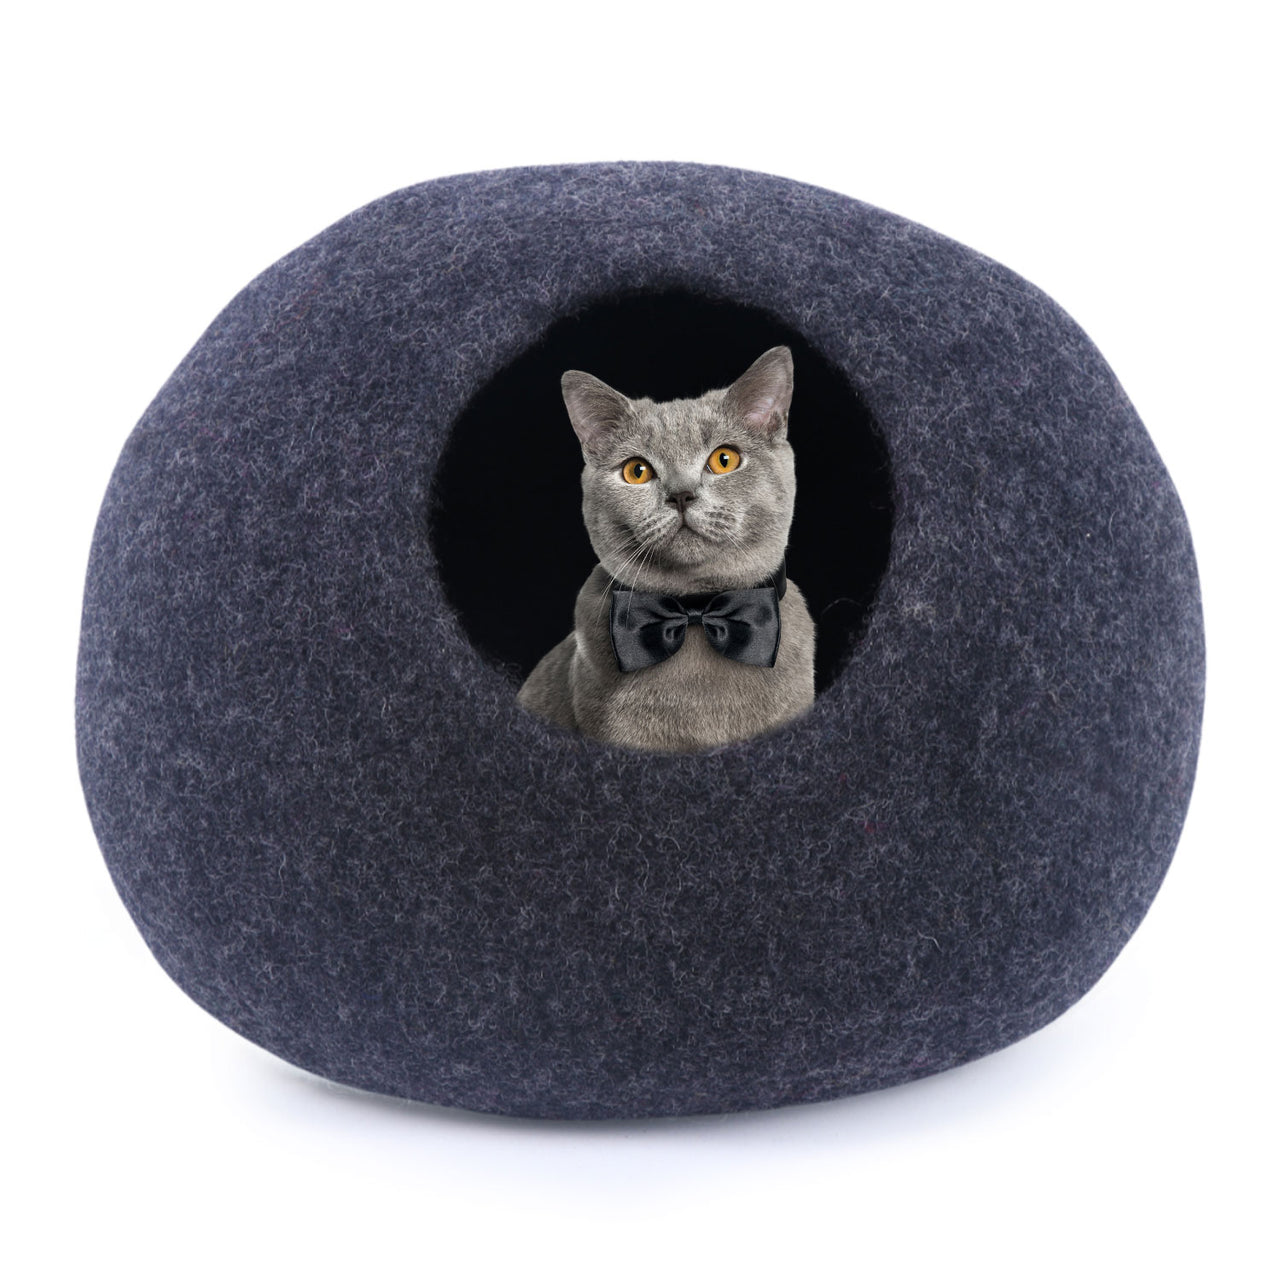 Felt and wool Premium Cat Bed Cave  - Eco Friendly 100% Merino Wool Beds for Cats and Kittens